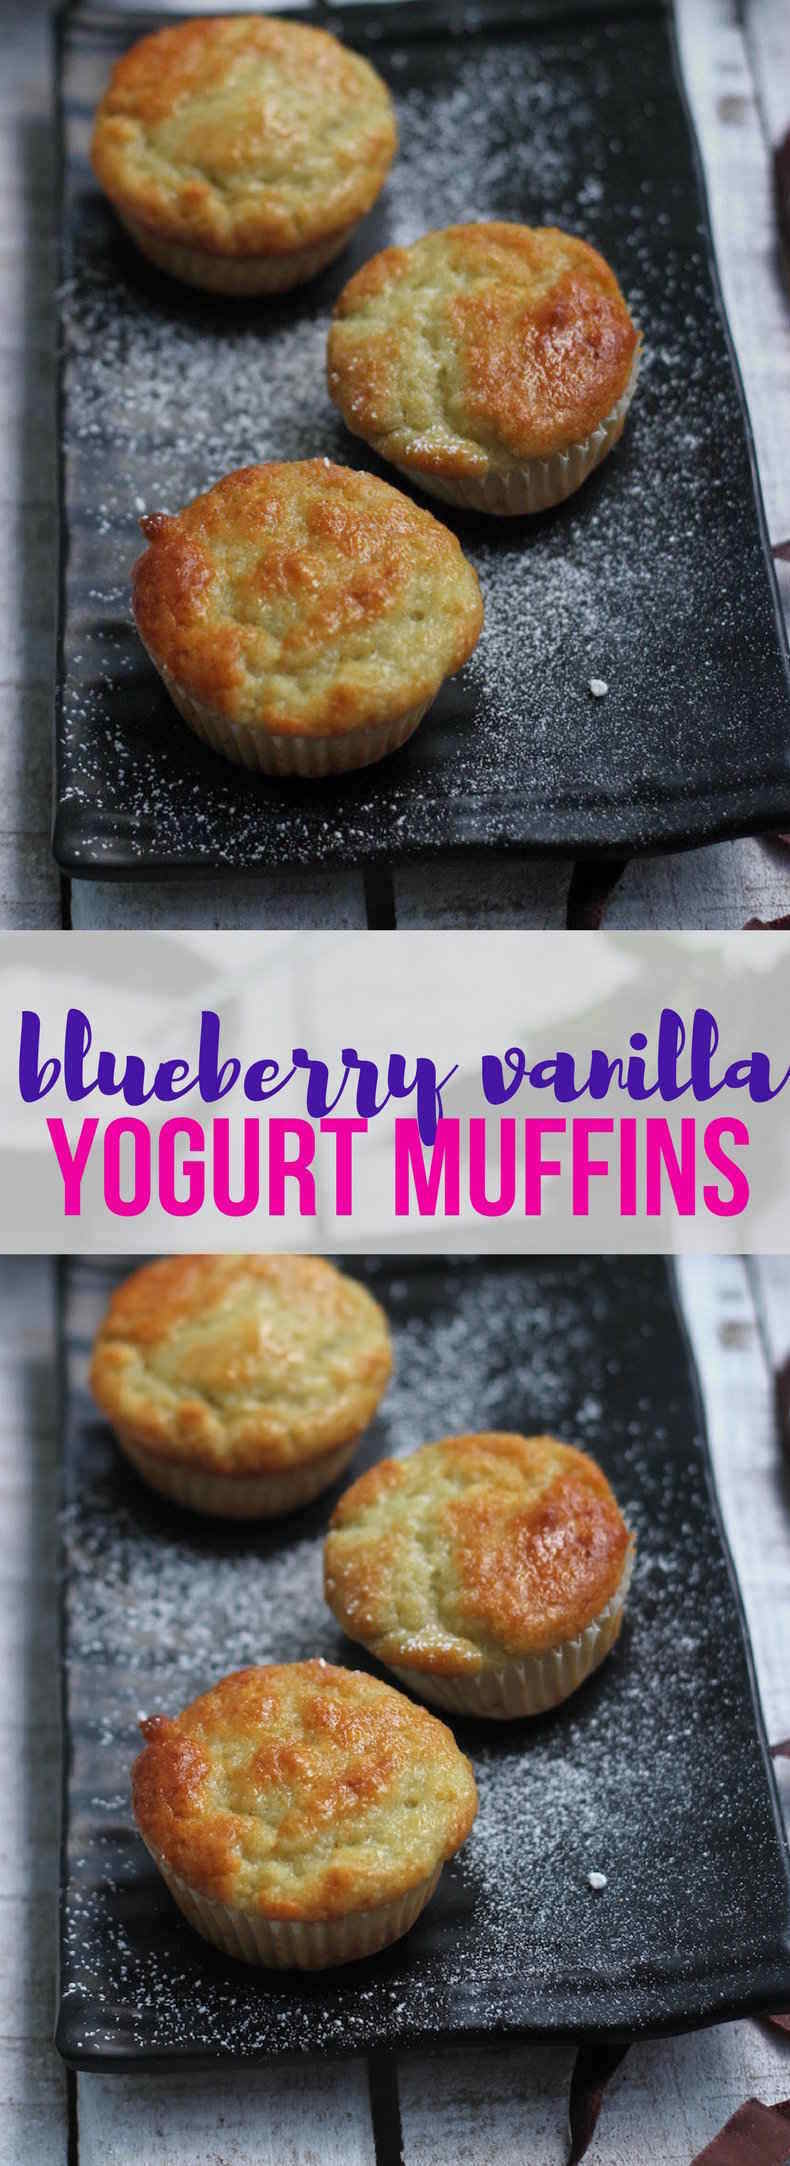 These Blueberry Vanilla Yogurt Muffins made with the addition of blueberry and vanilla yogurt are deliciously fruity muffins that you can make even if you don't have blueberries on hand